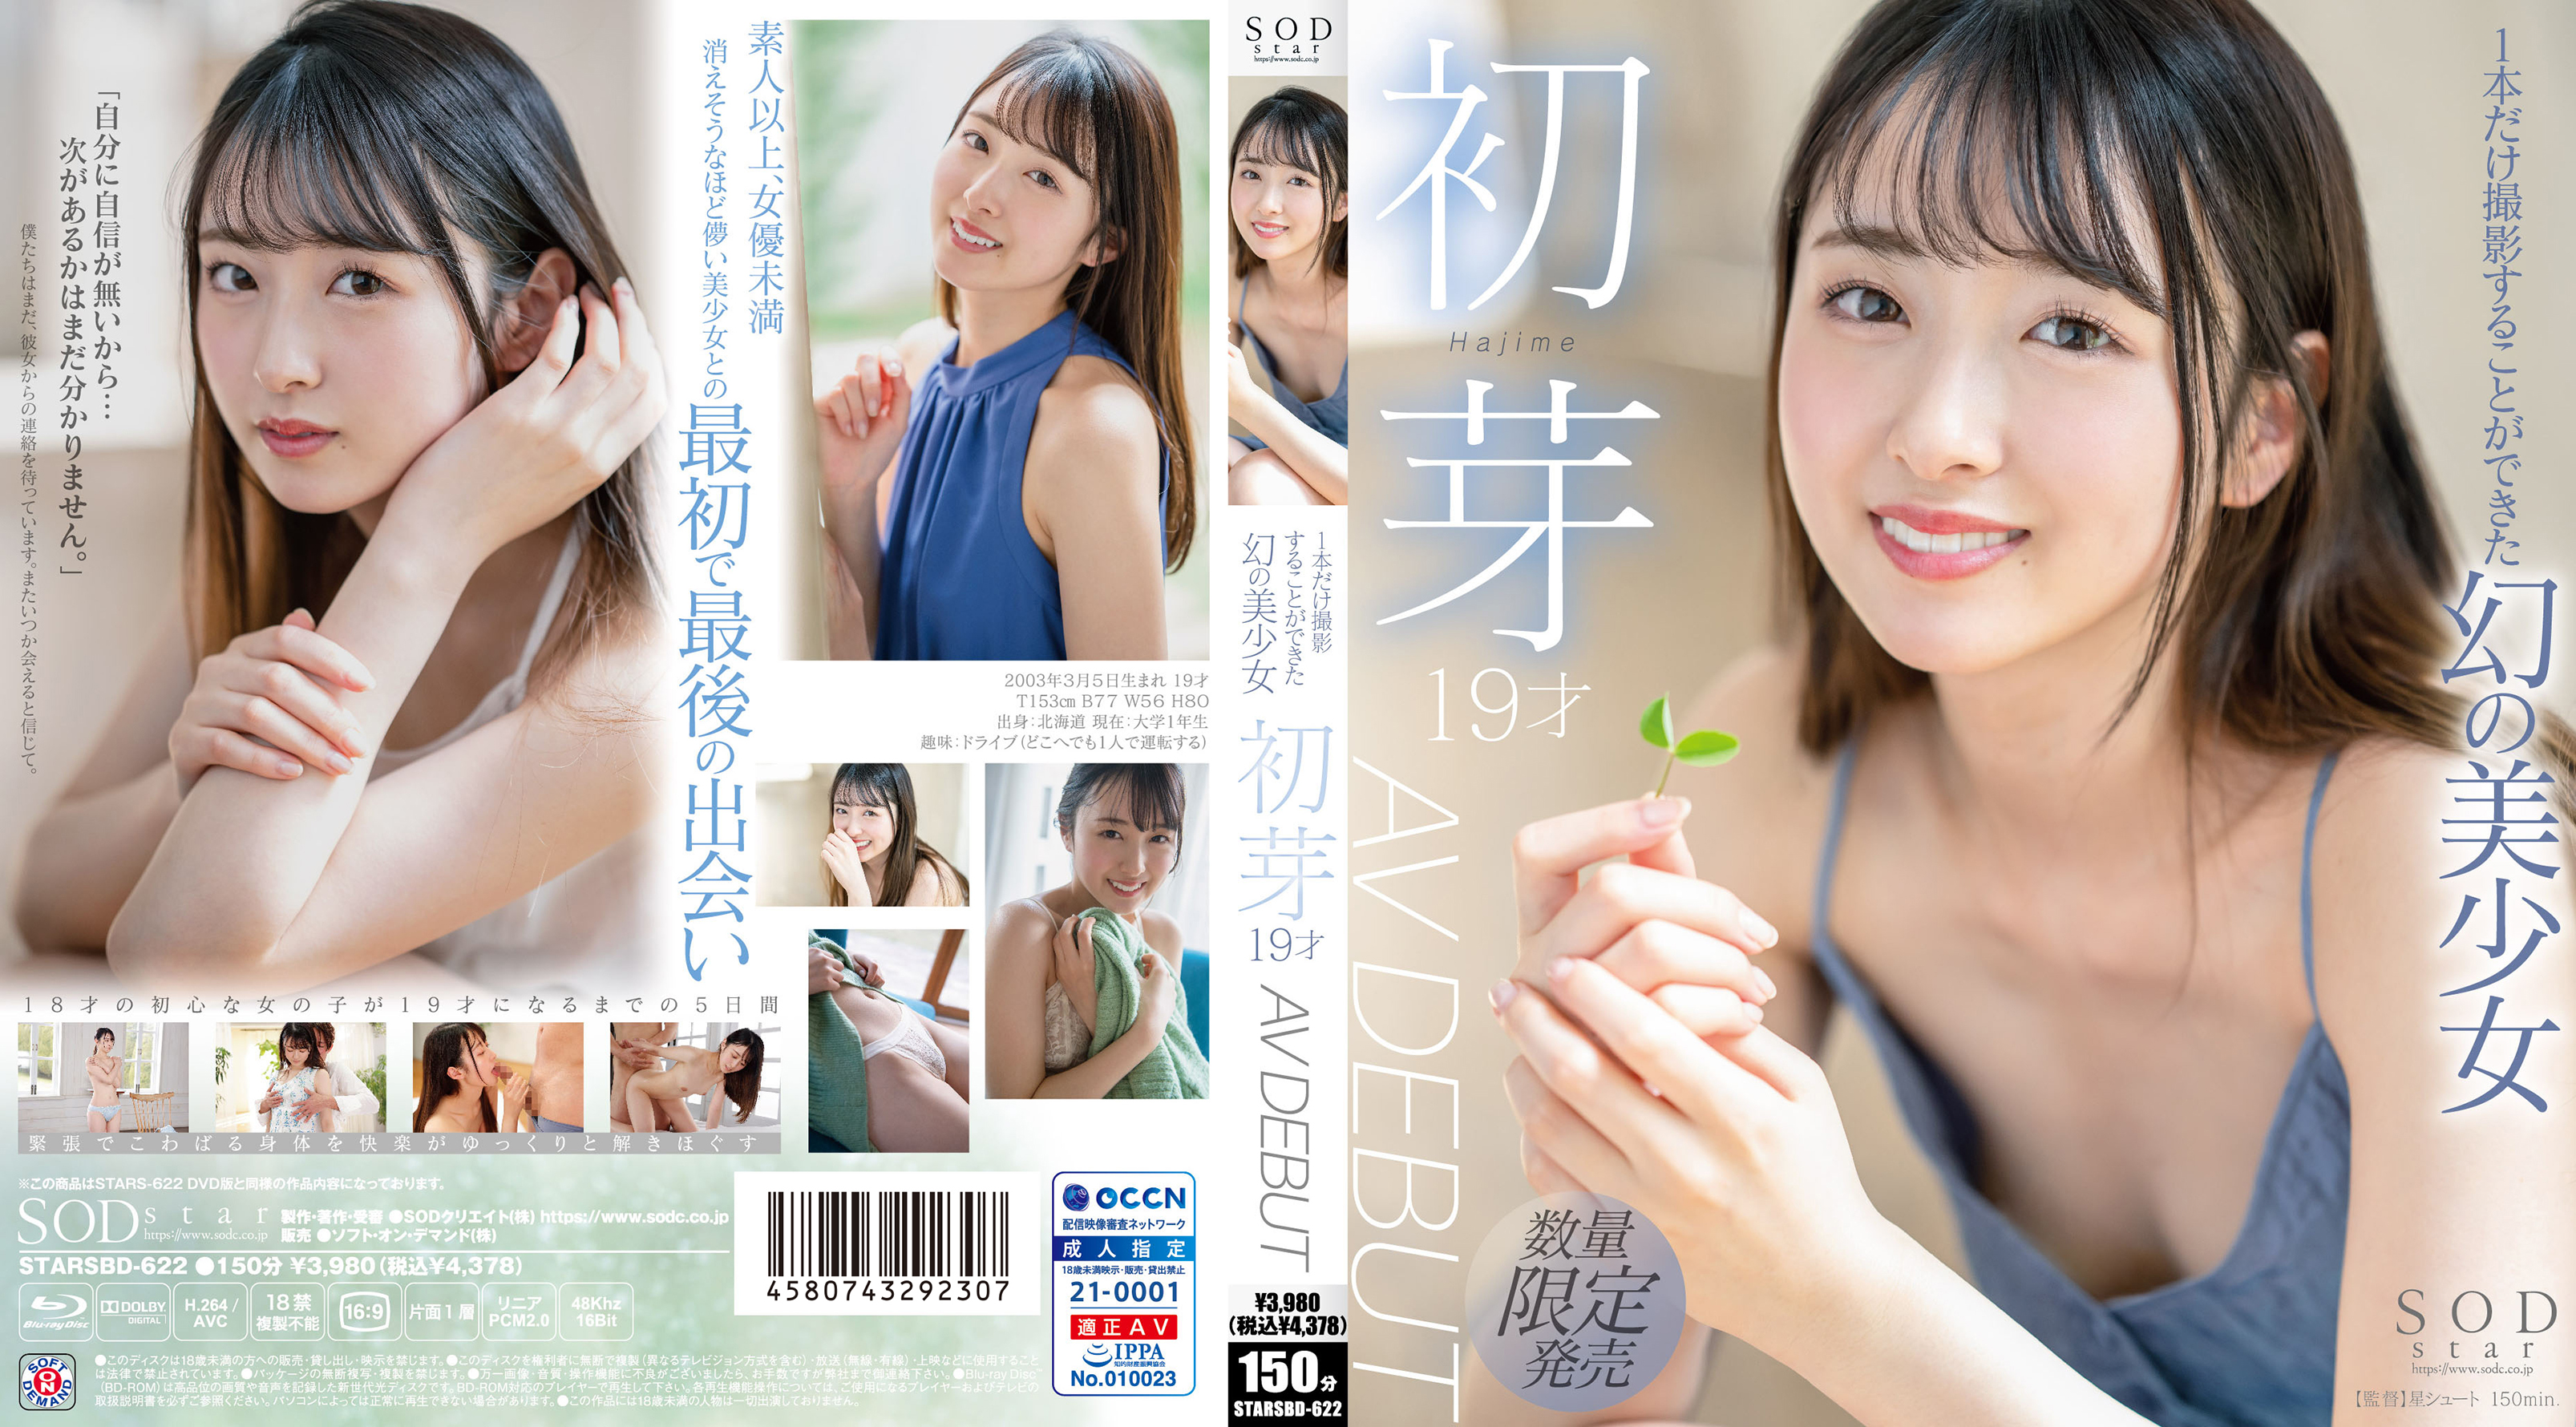 STARSBD-622 A Phantom Beautiful Girl Who Could Only Shoot One Hatsume 19 Years Old AV DEBUT - First Shoots